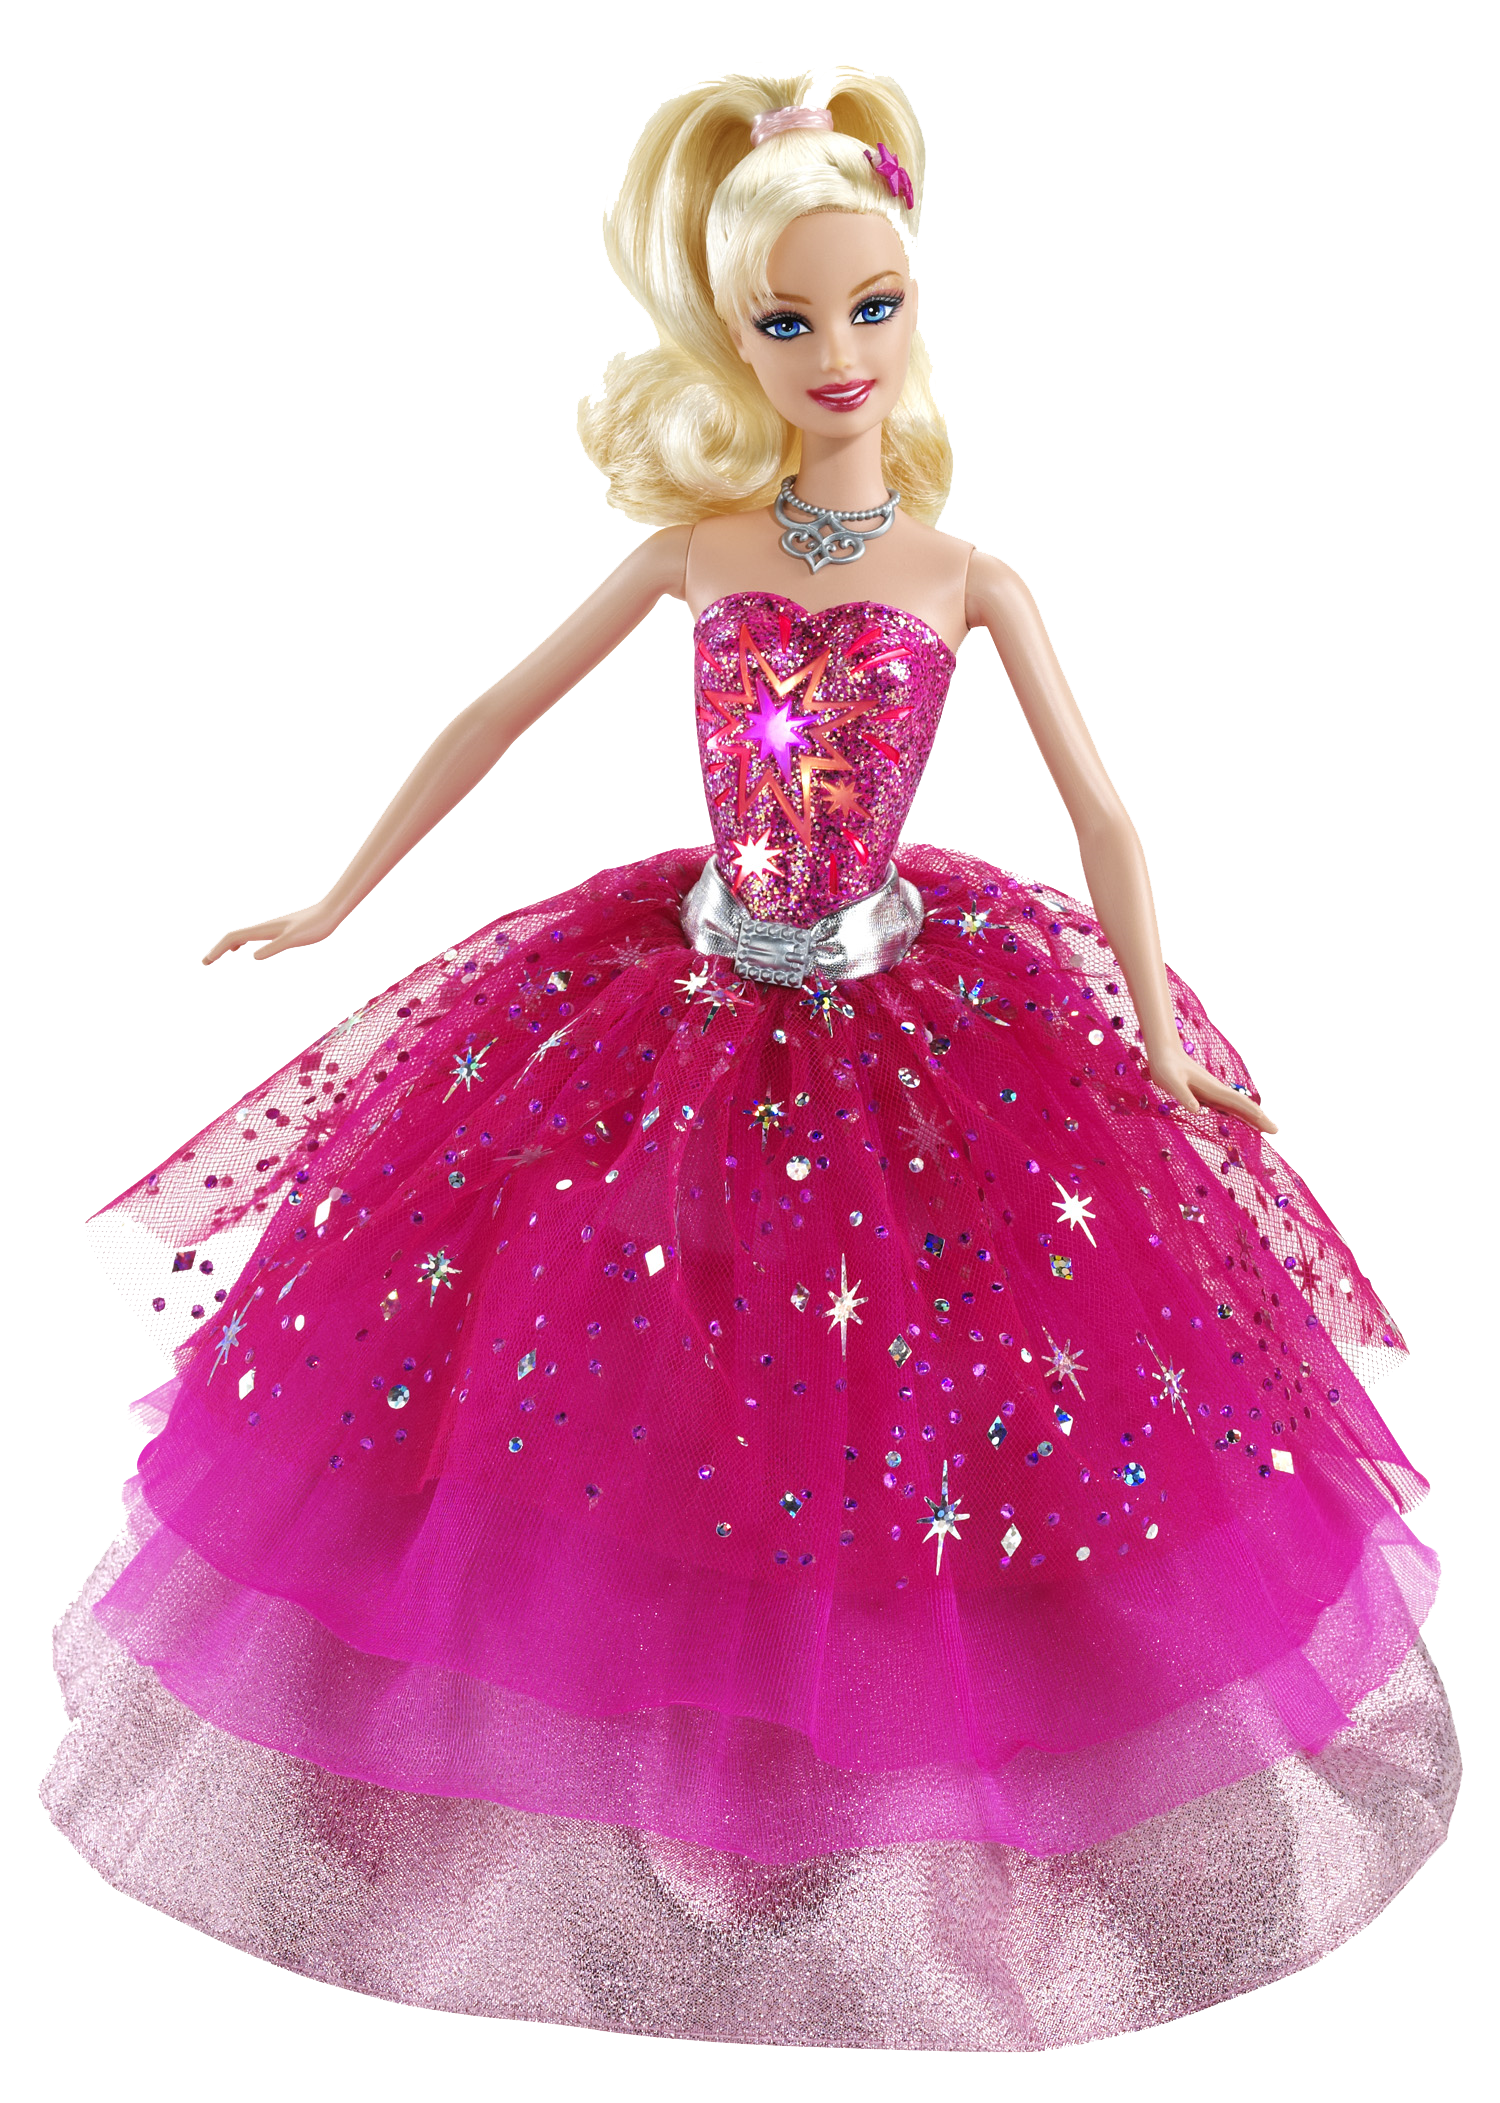 free-barbie-doll-png-transparent-images-download-free-barbie-doll-png